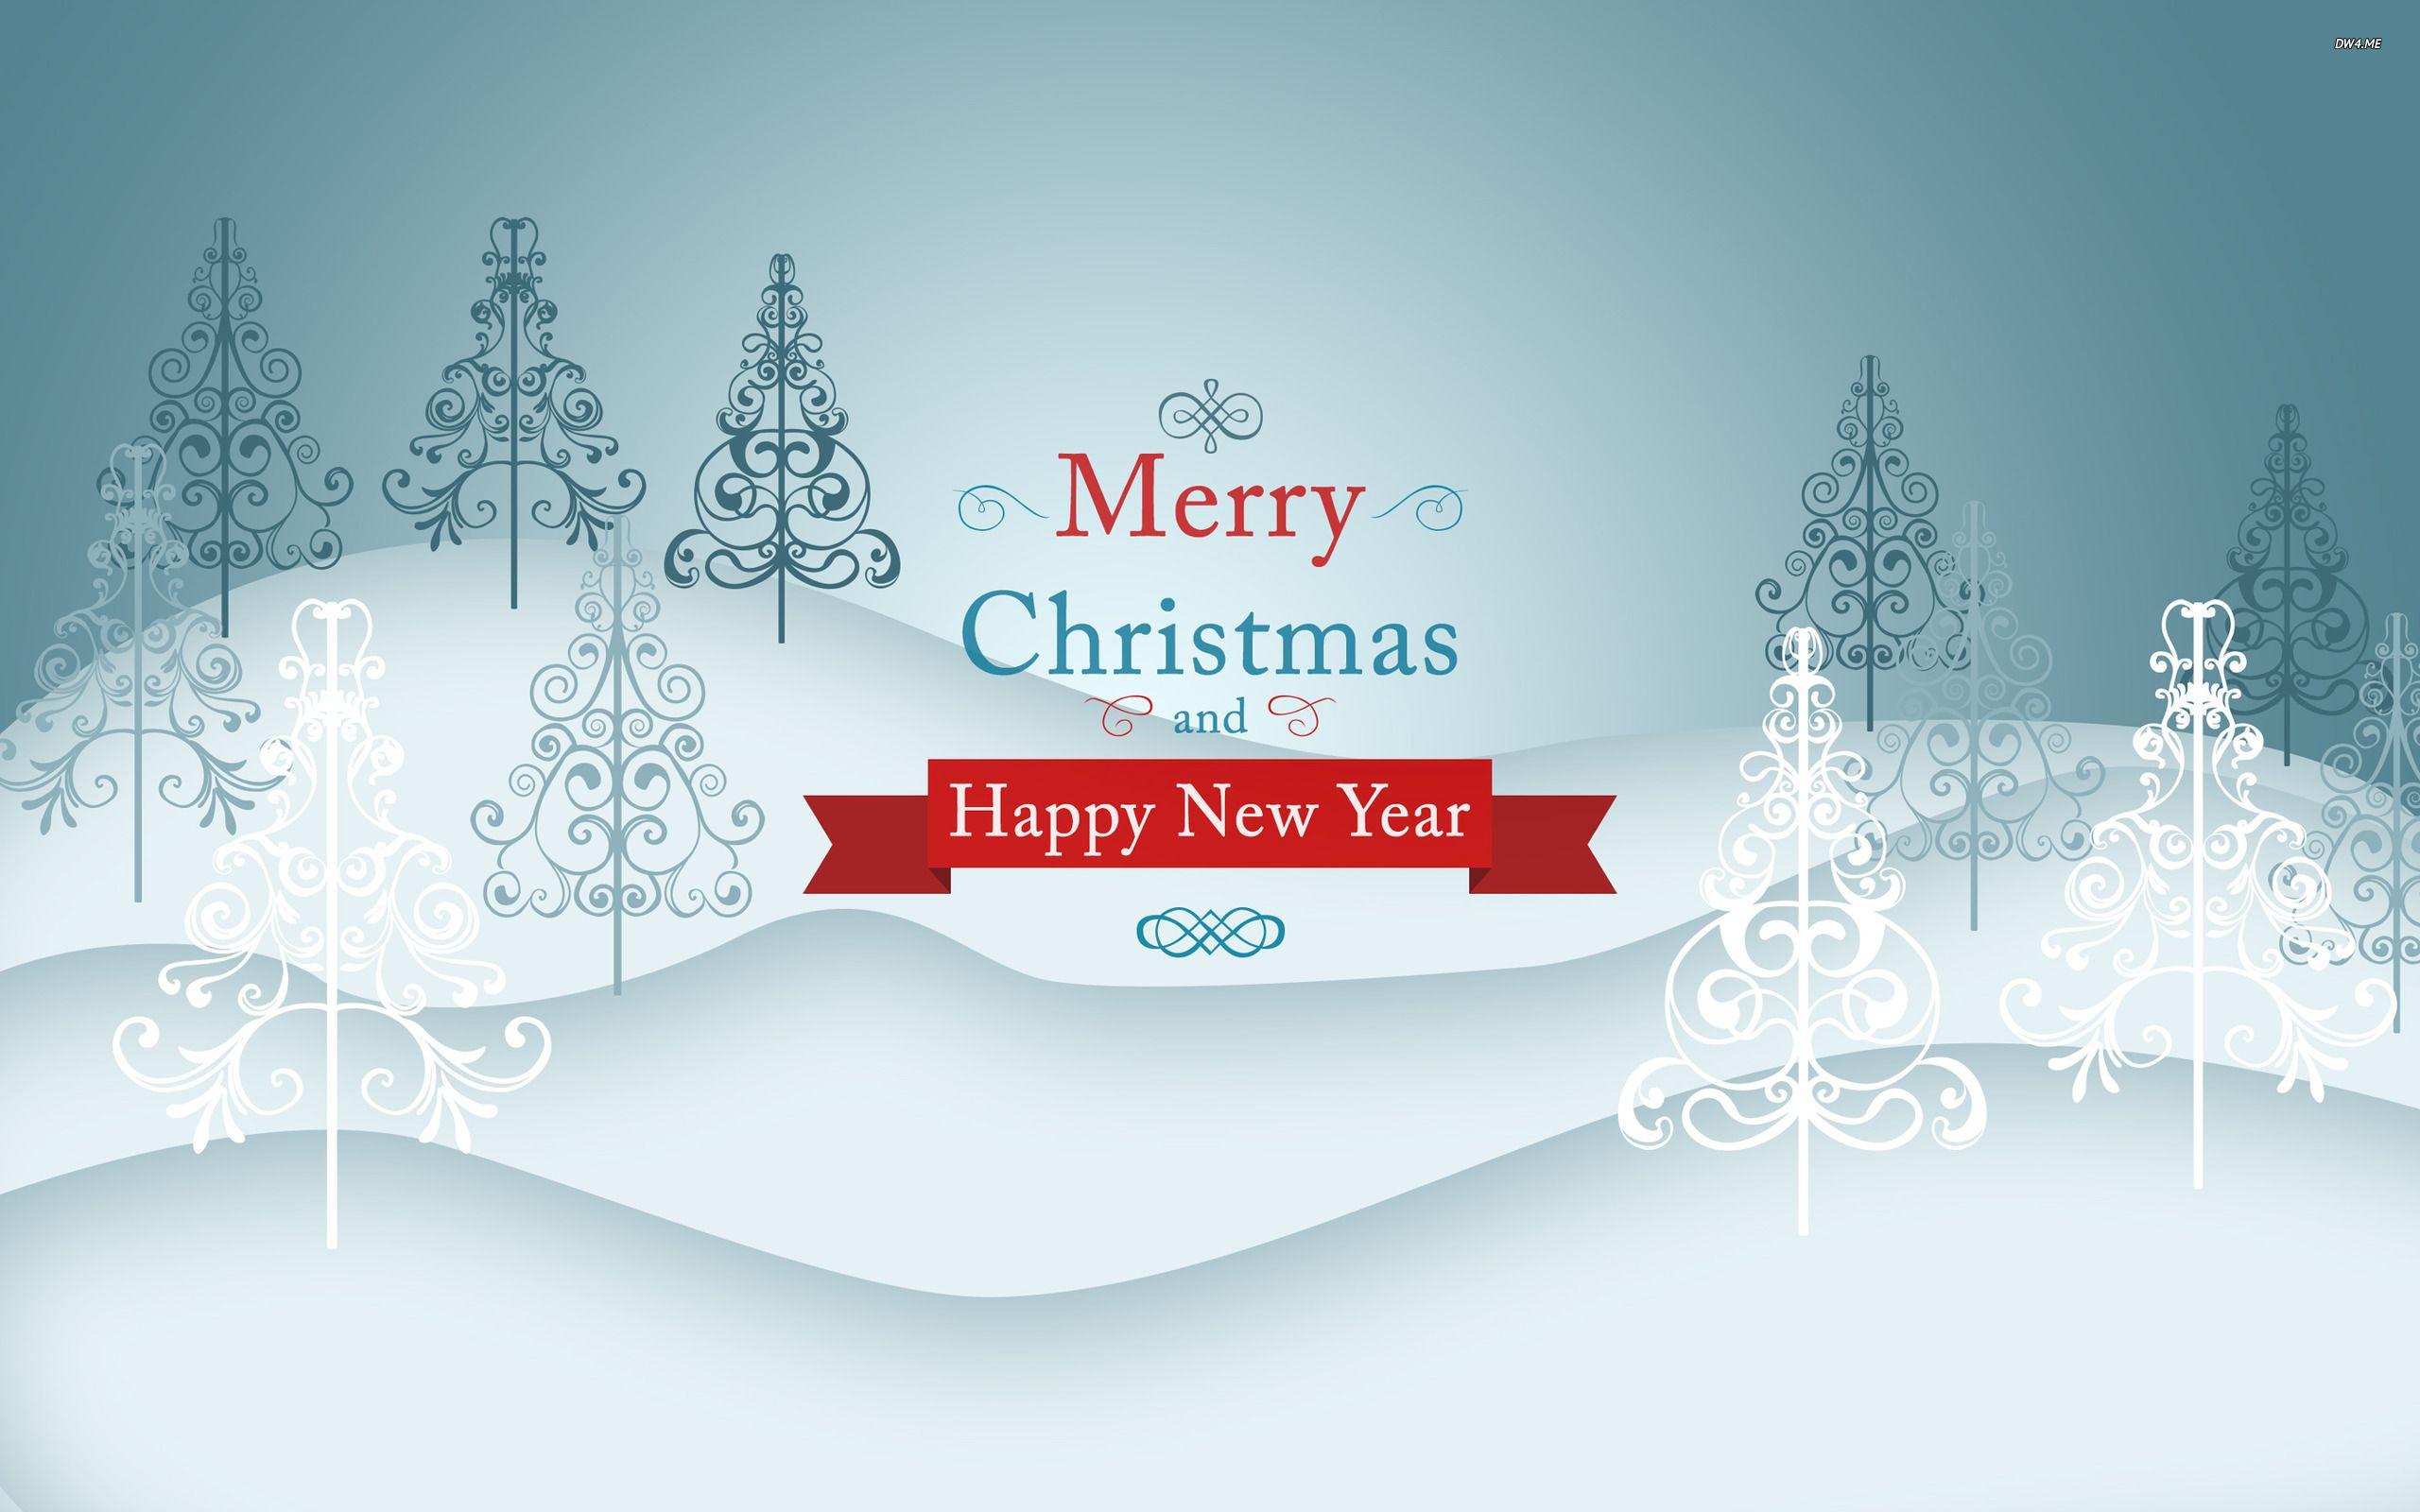 Christmas And Happy New year Wallpaper 8. Christmas wallpaper, Happy new year wallpaper, Merry christmas wallpaper